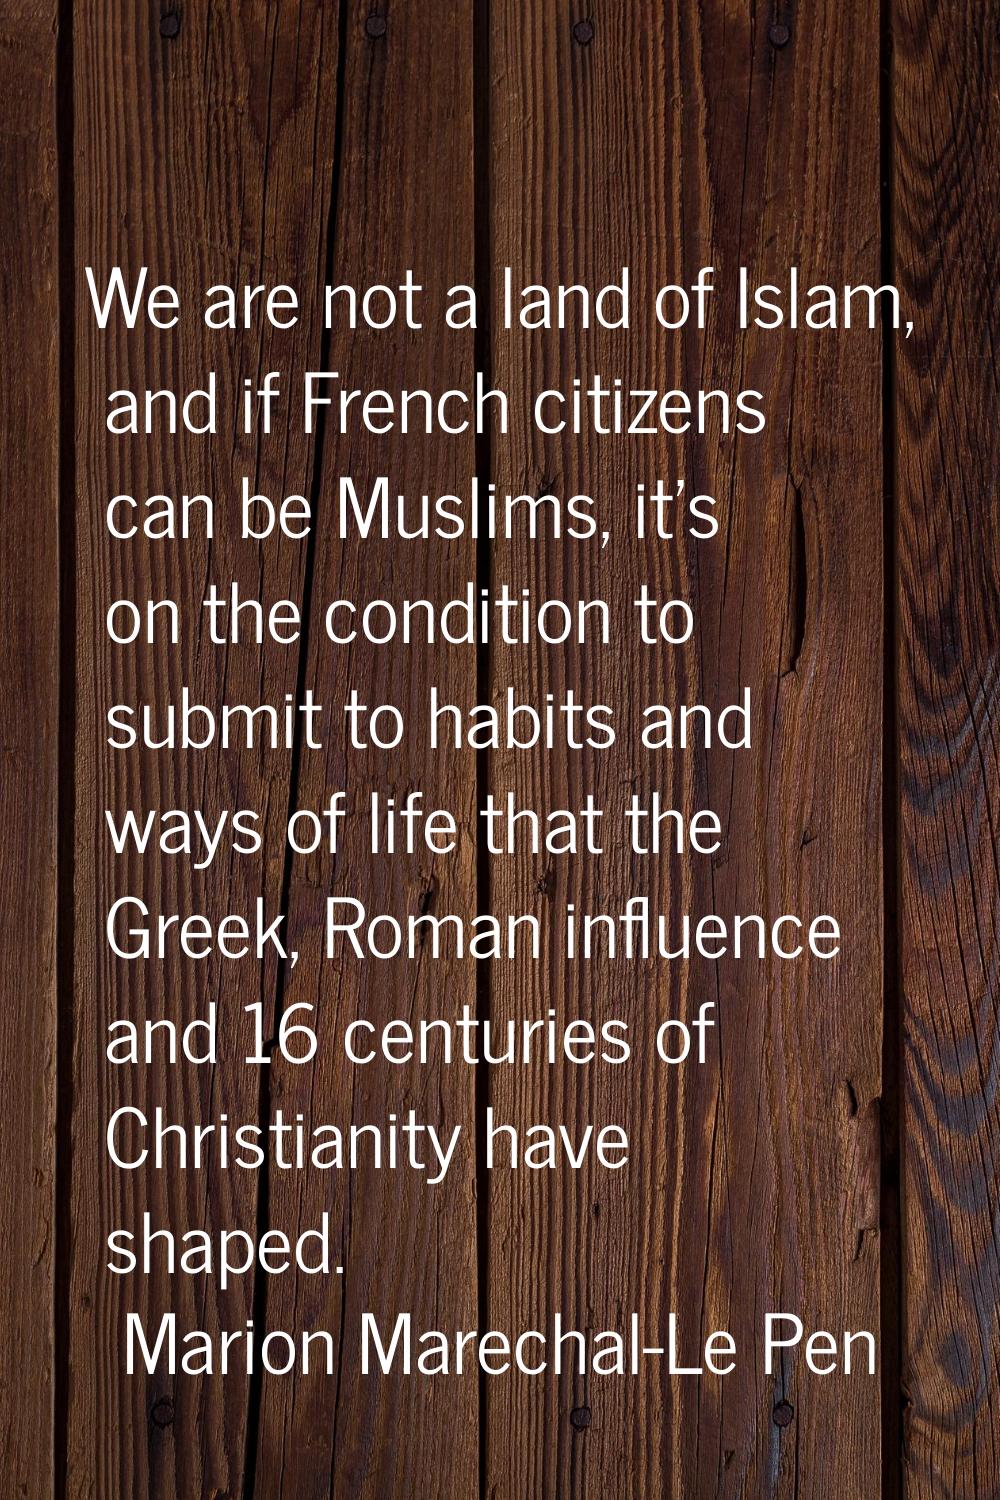 We are not a land of Islam, and if French citizens can be Muslims, it's on the condition to submit 